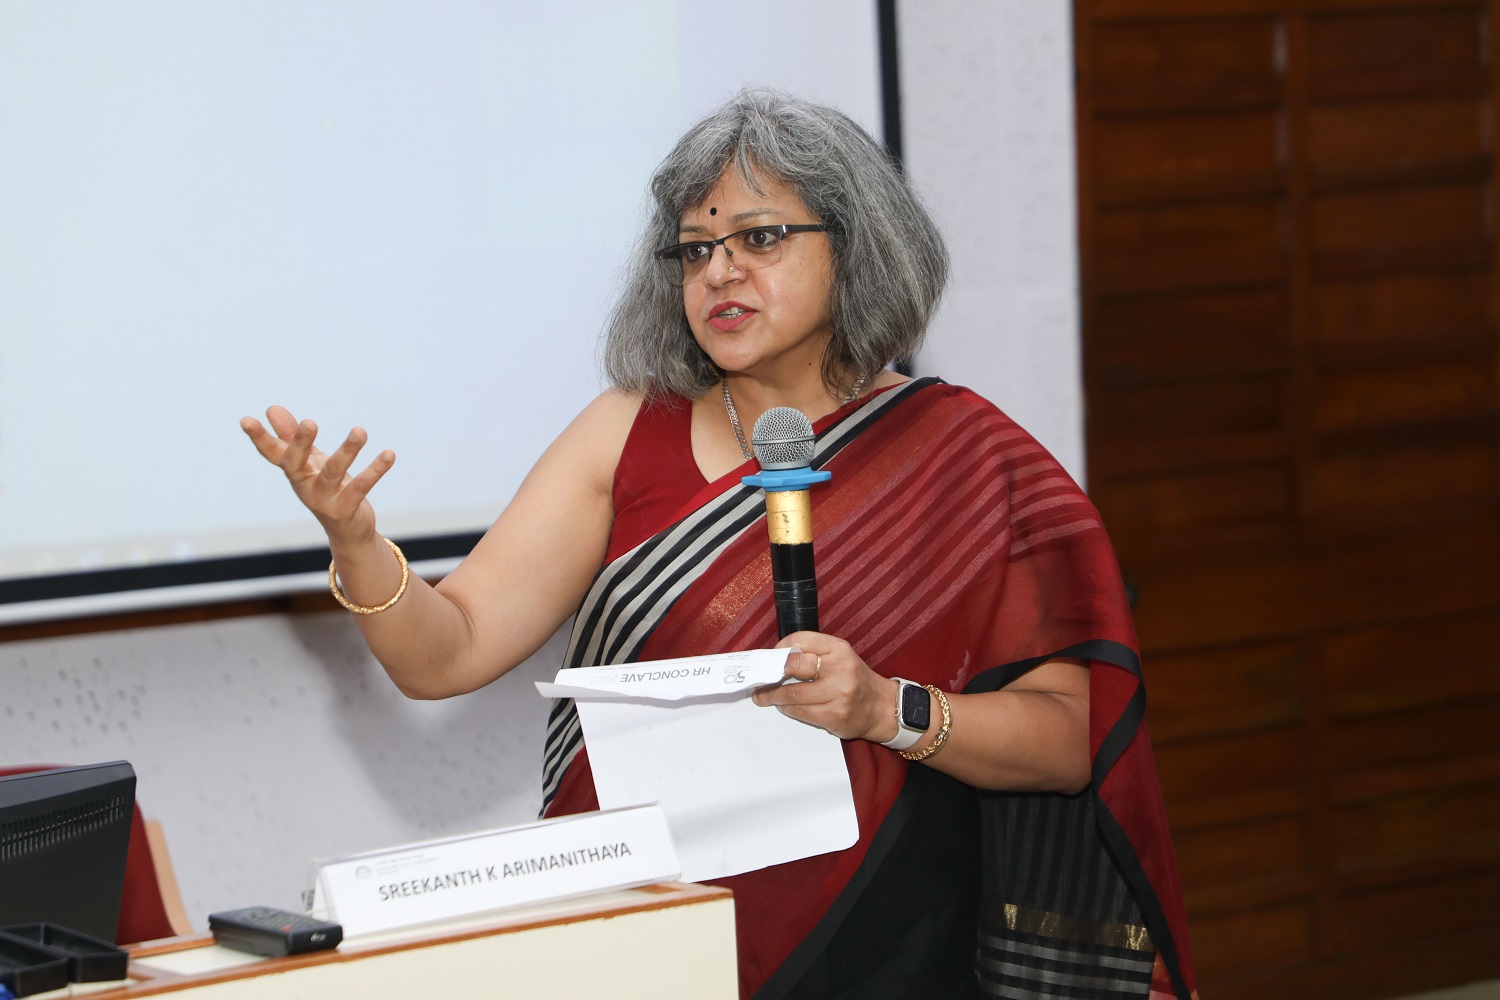 Prof. Debolina Dutta, Chairperson, Career Development Services and faculty of the Organizational Behavior & Human Resources Management area of IIMB, delivers the welcome address at the ‘HR Business Conclave’, hosted by the Career Development Services team of IIM Bangalore on 12th July 2023.